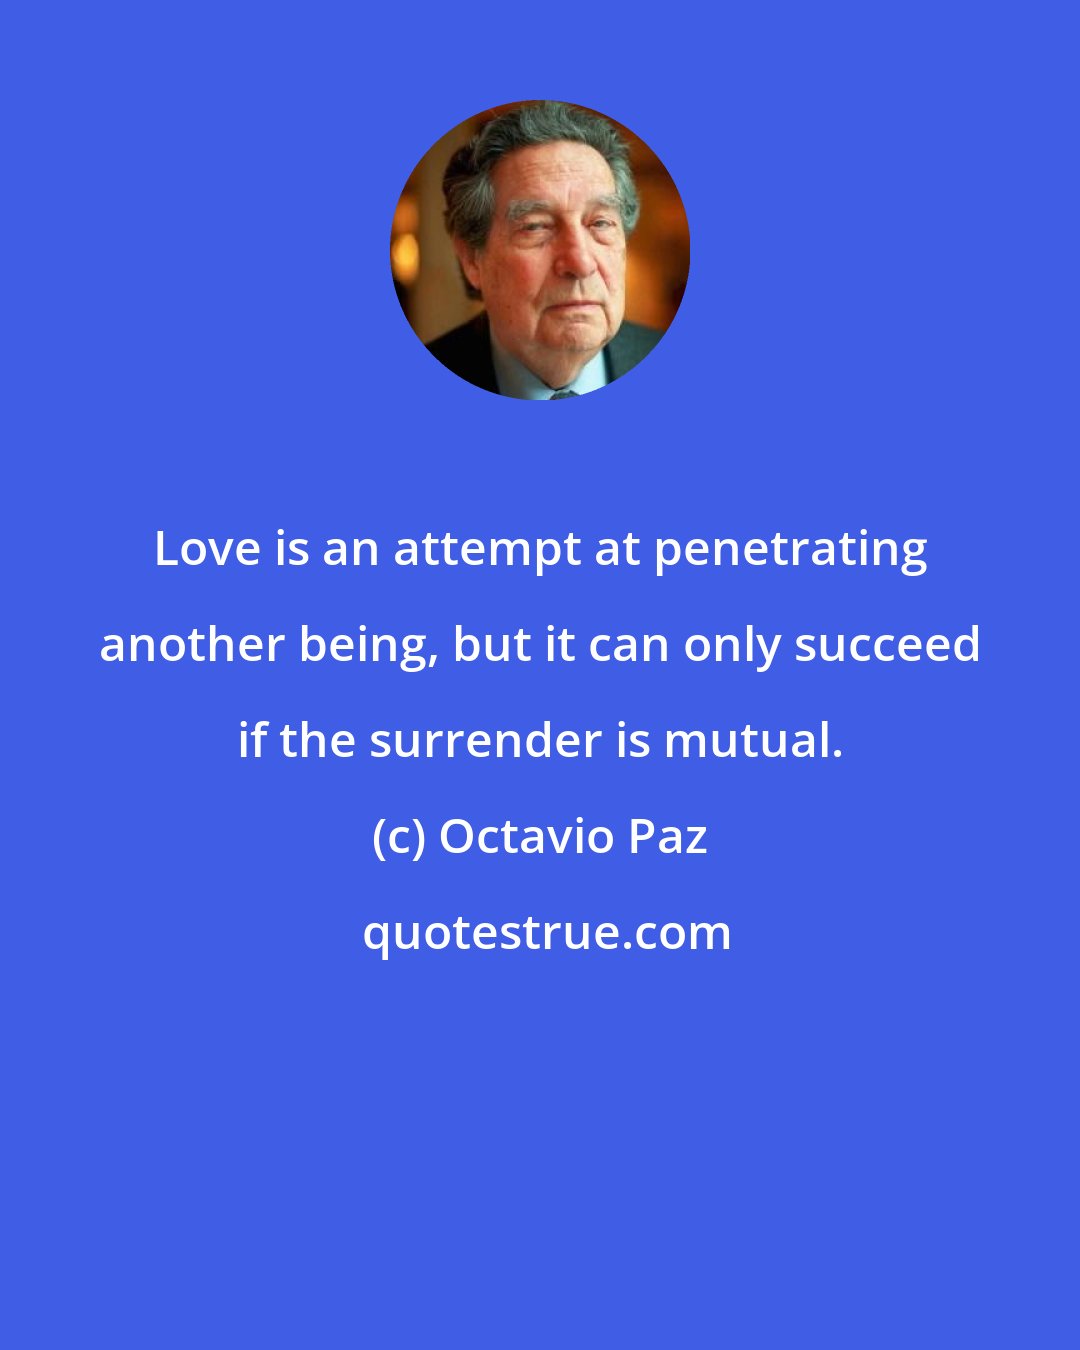 Octavio Paz: Love is an attempt at penetrating another being, but it can only succeed if the surrender is mutual.